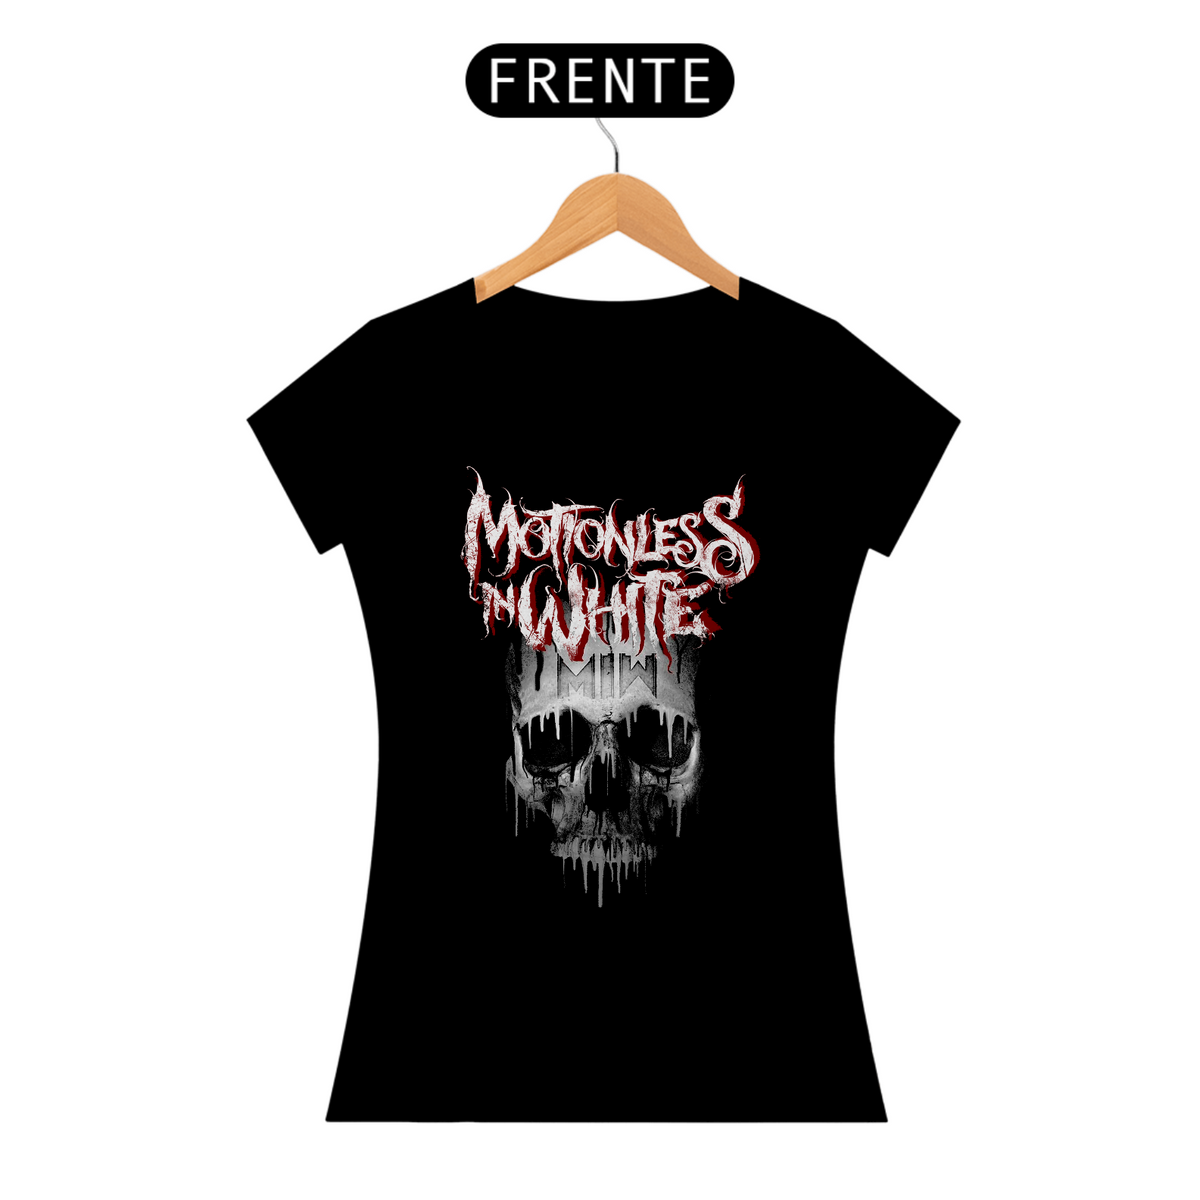 Nome do produto: Motionless in White - Baby Look